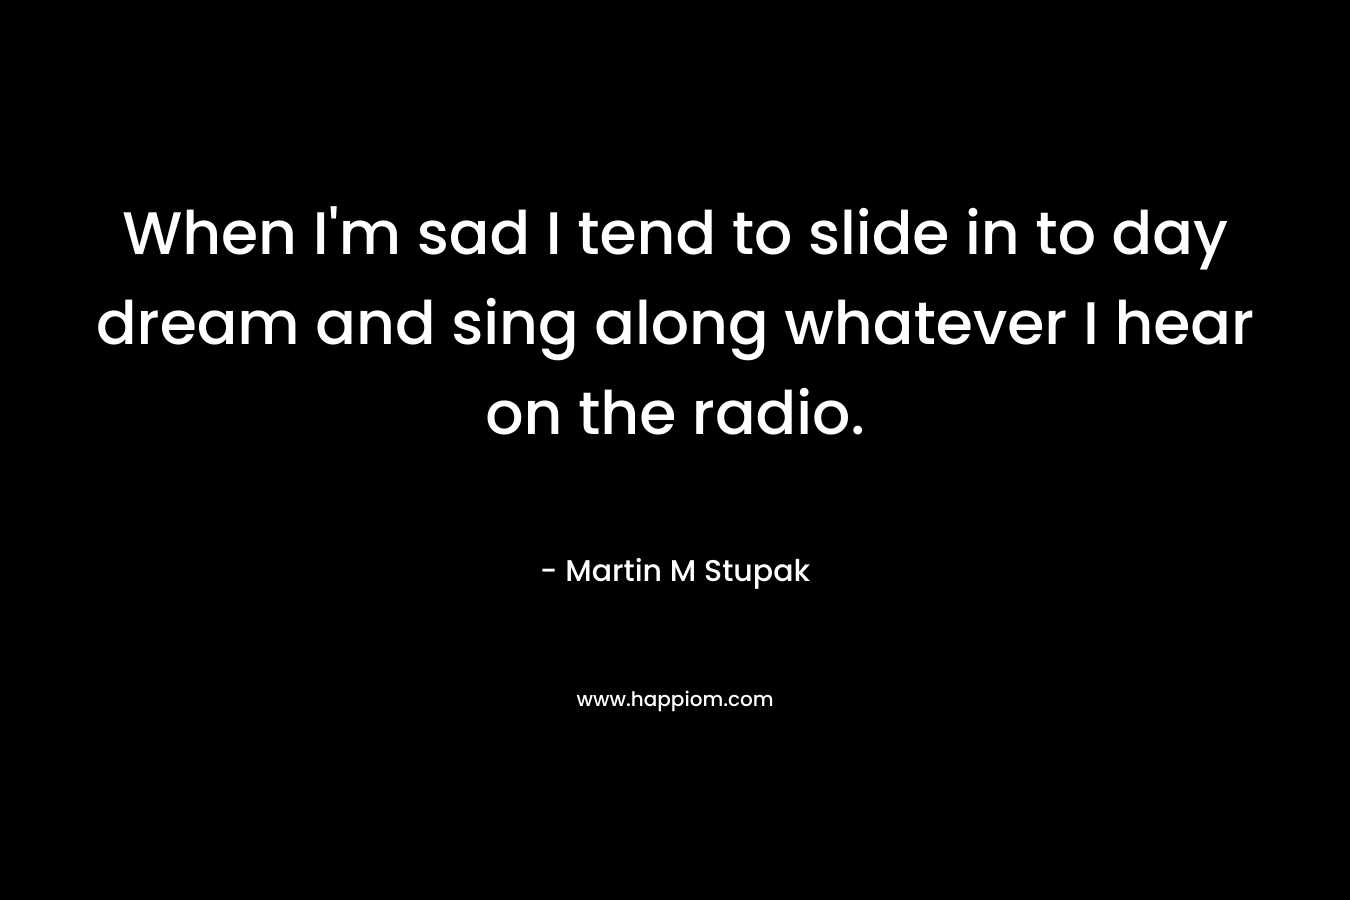 When I’m sad I tend to slide in to day dream and sing along whatever I hear on the radio. – Martin M Stupak